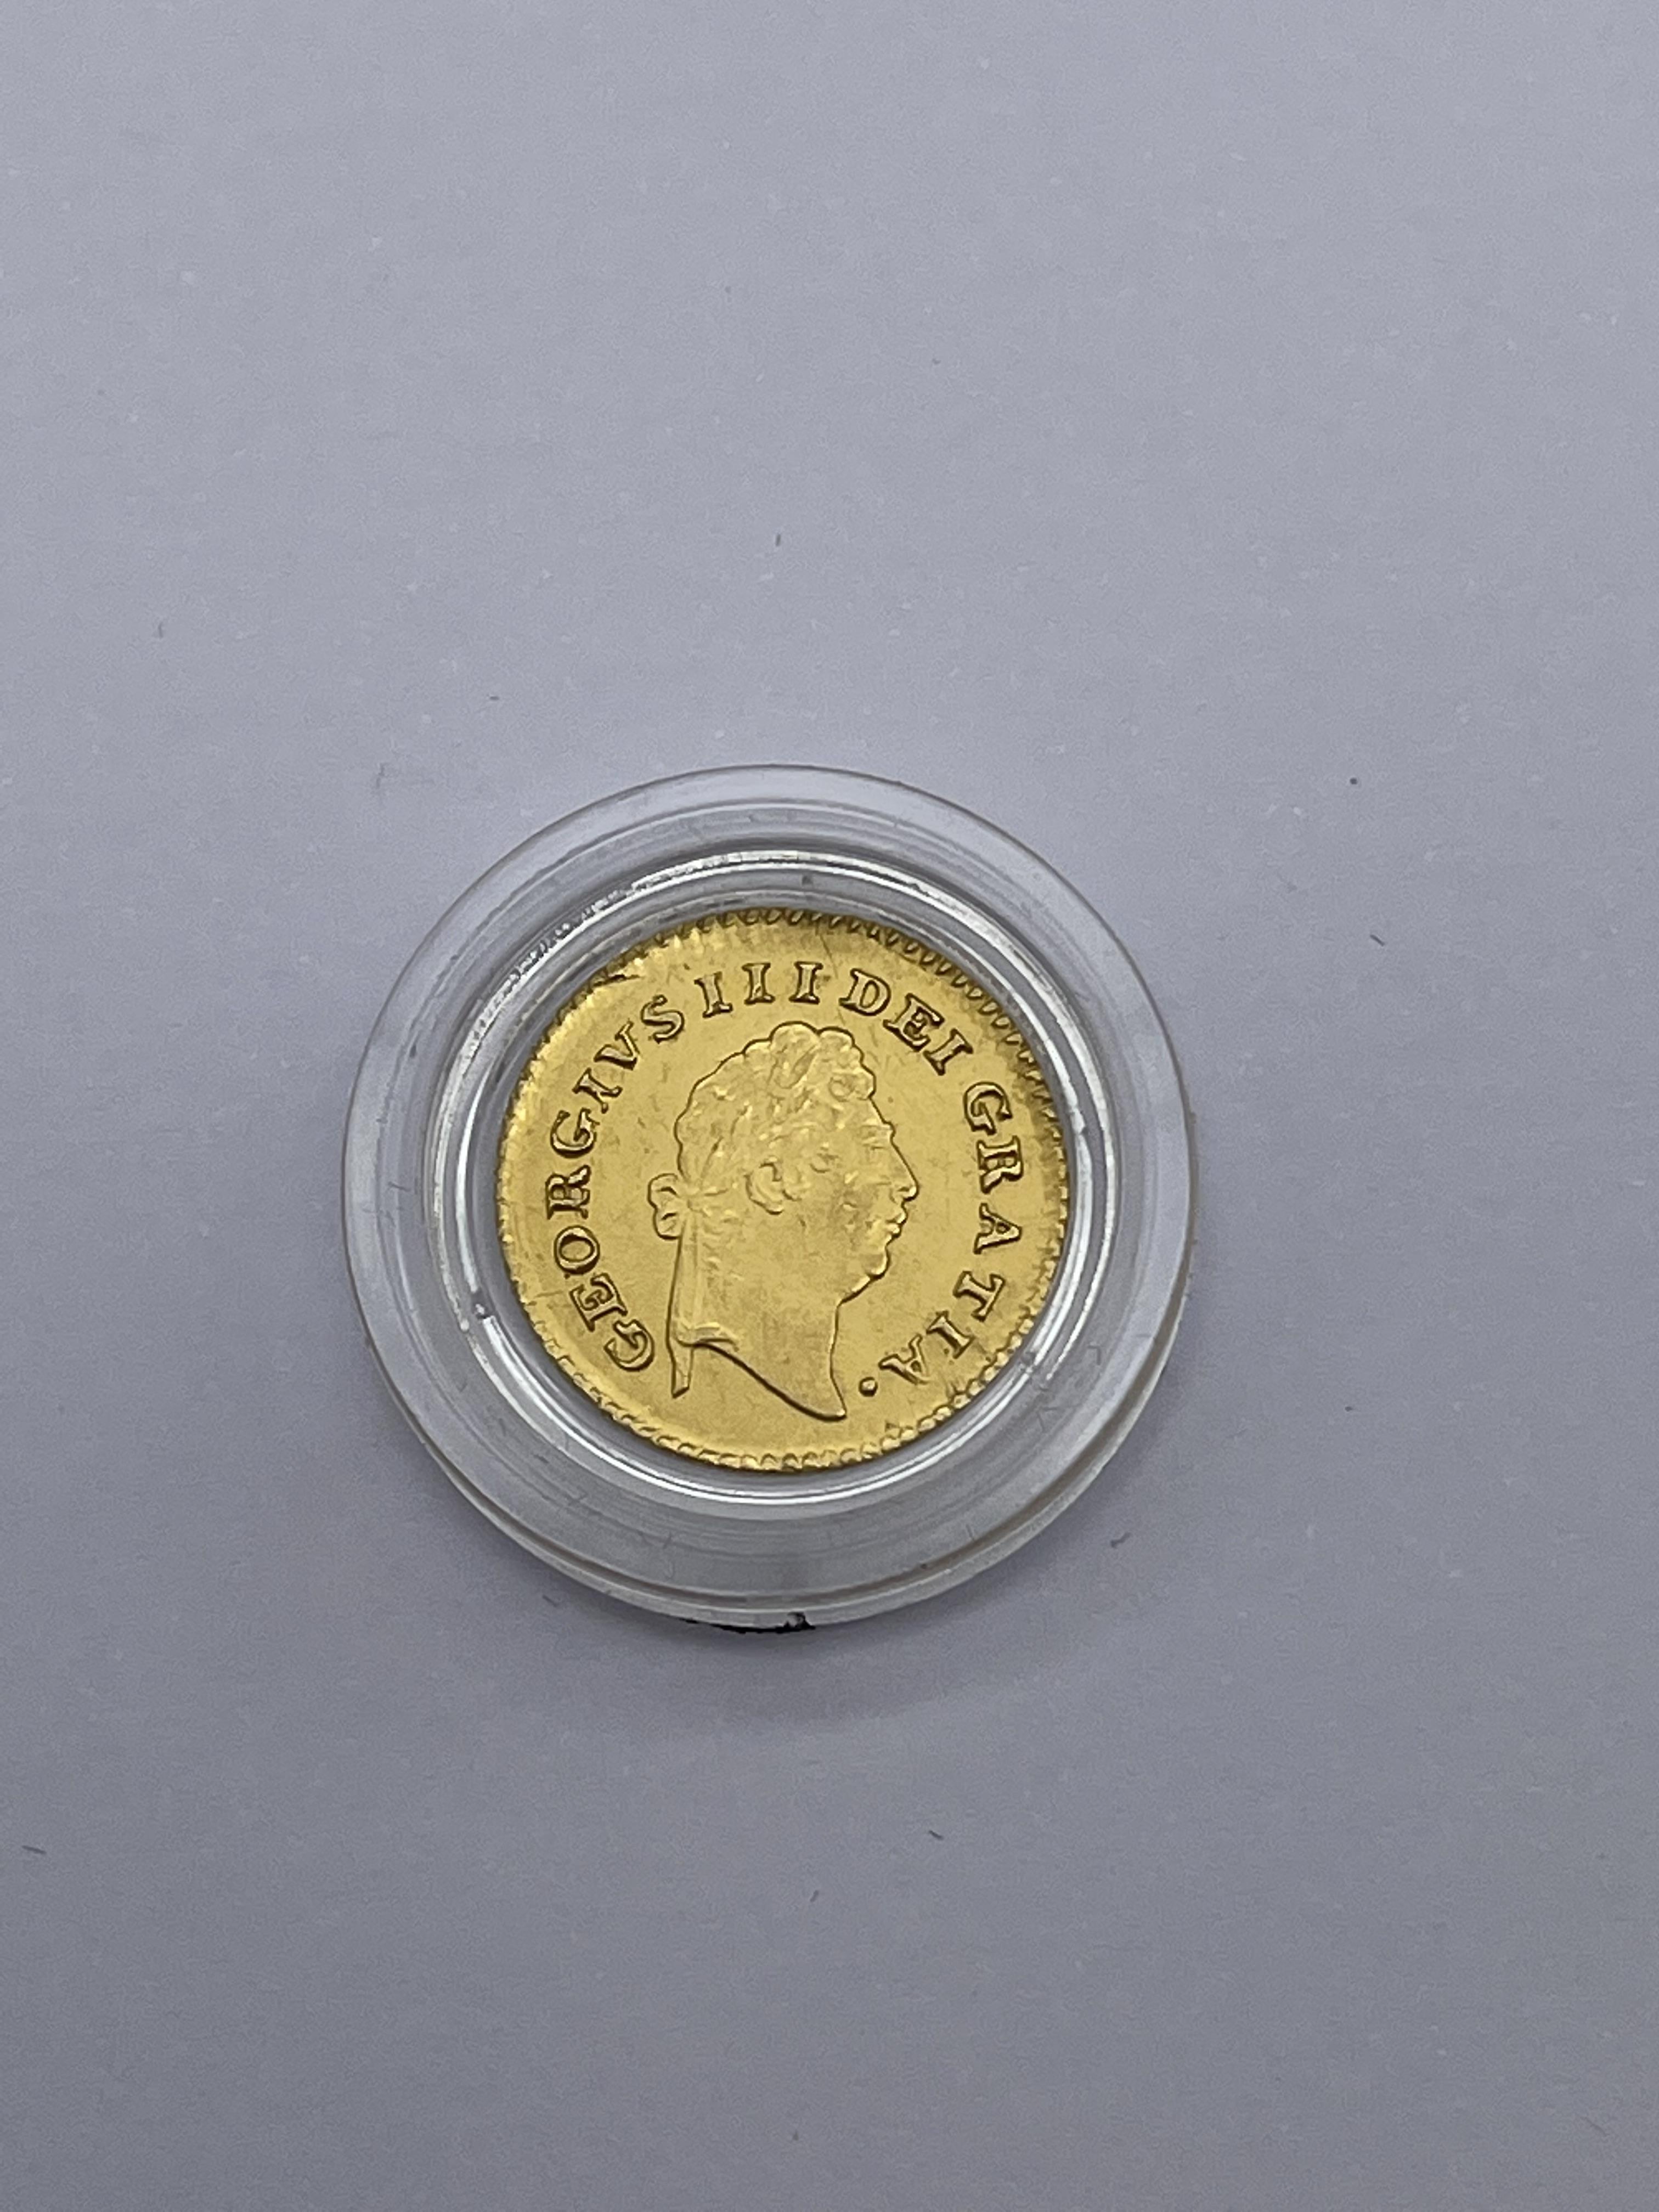 The King George III Gold Third Guinea of 1800 - 22 - Image 3 of 8